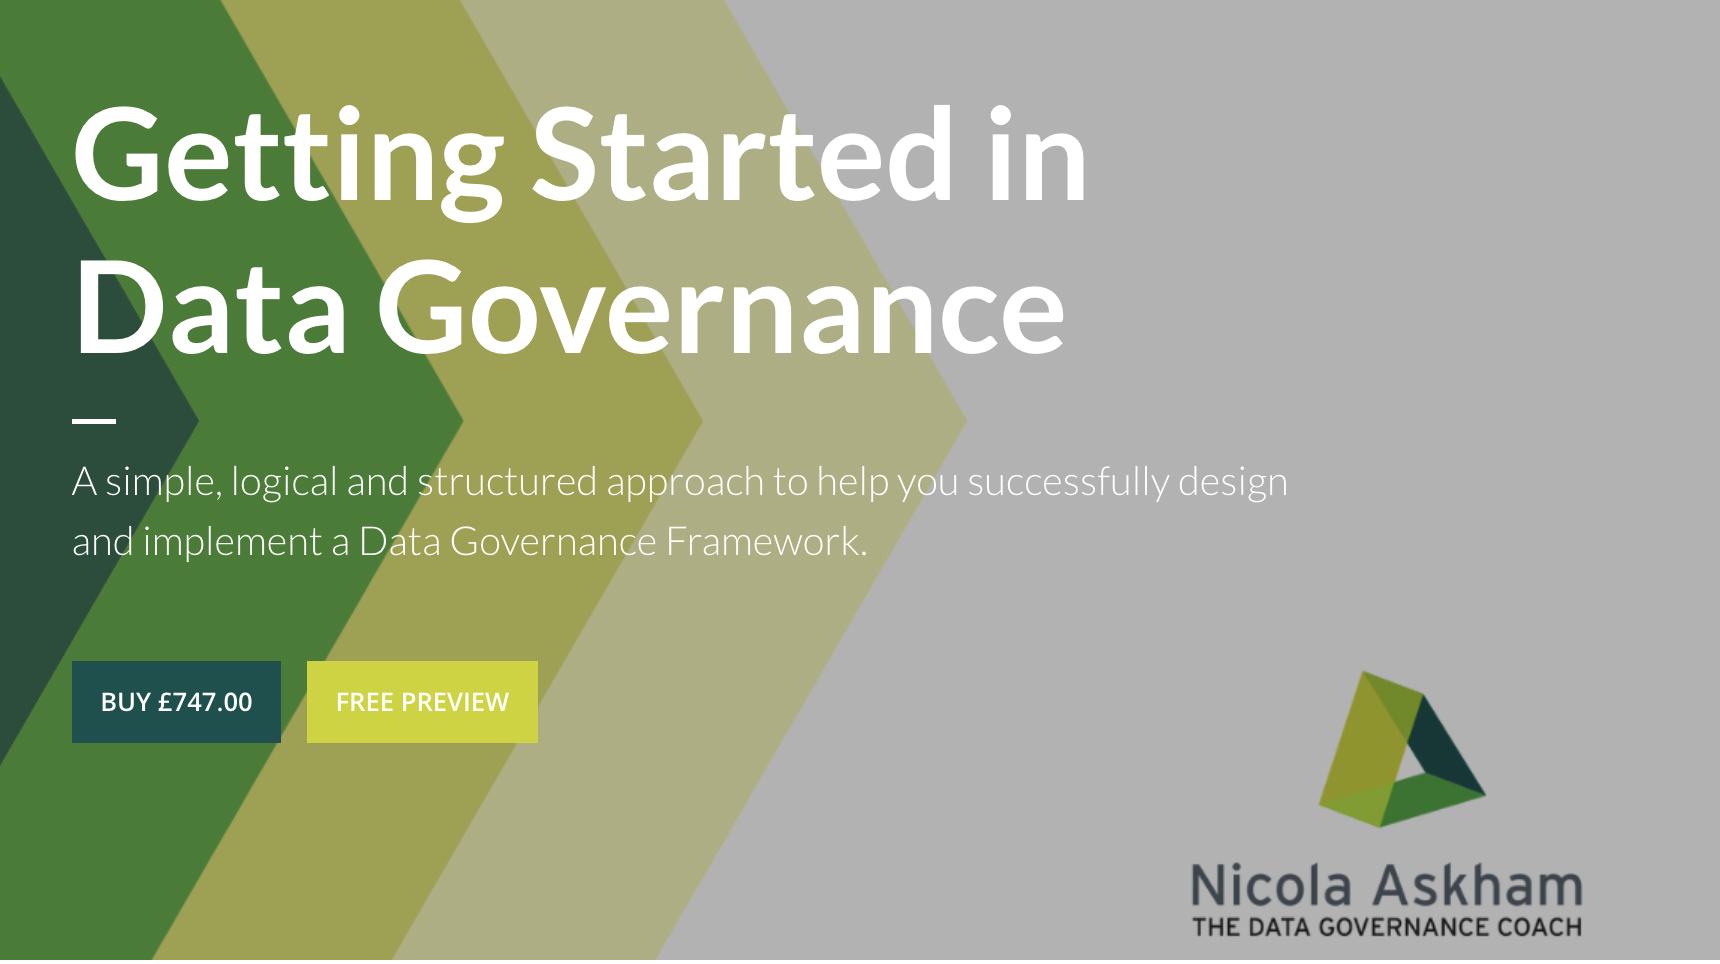 Getting Started in Data Governance